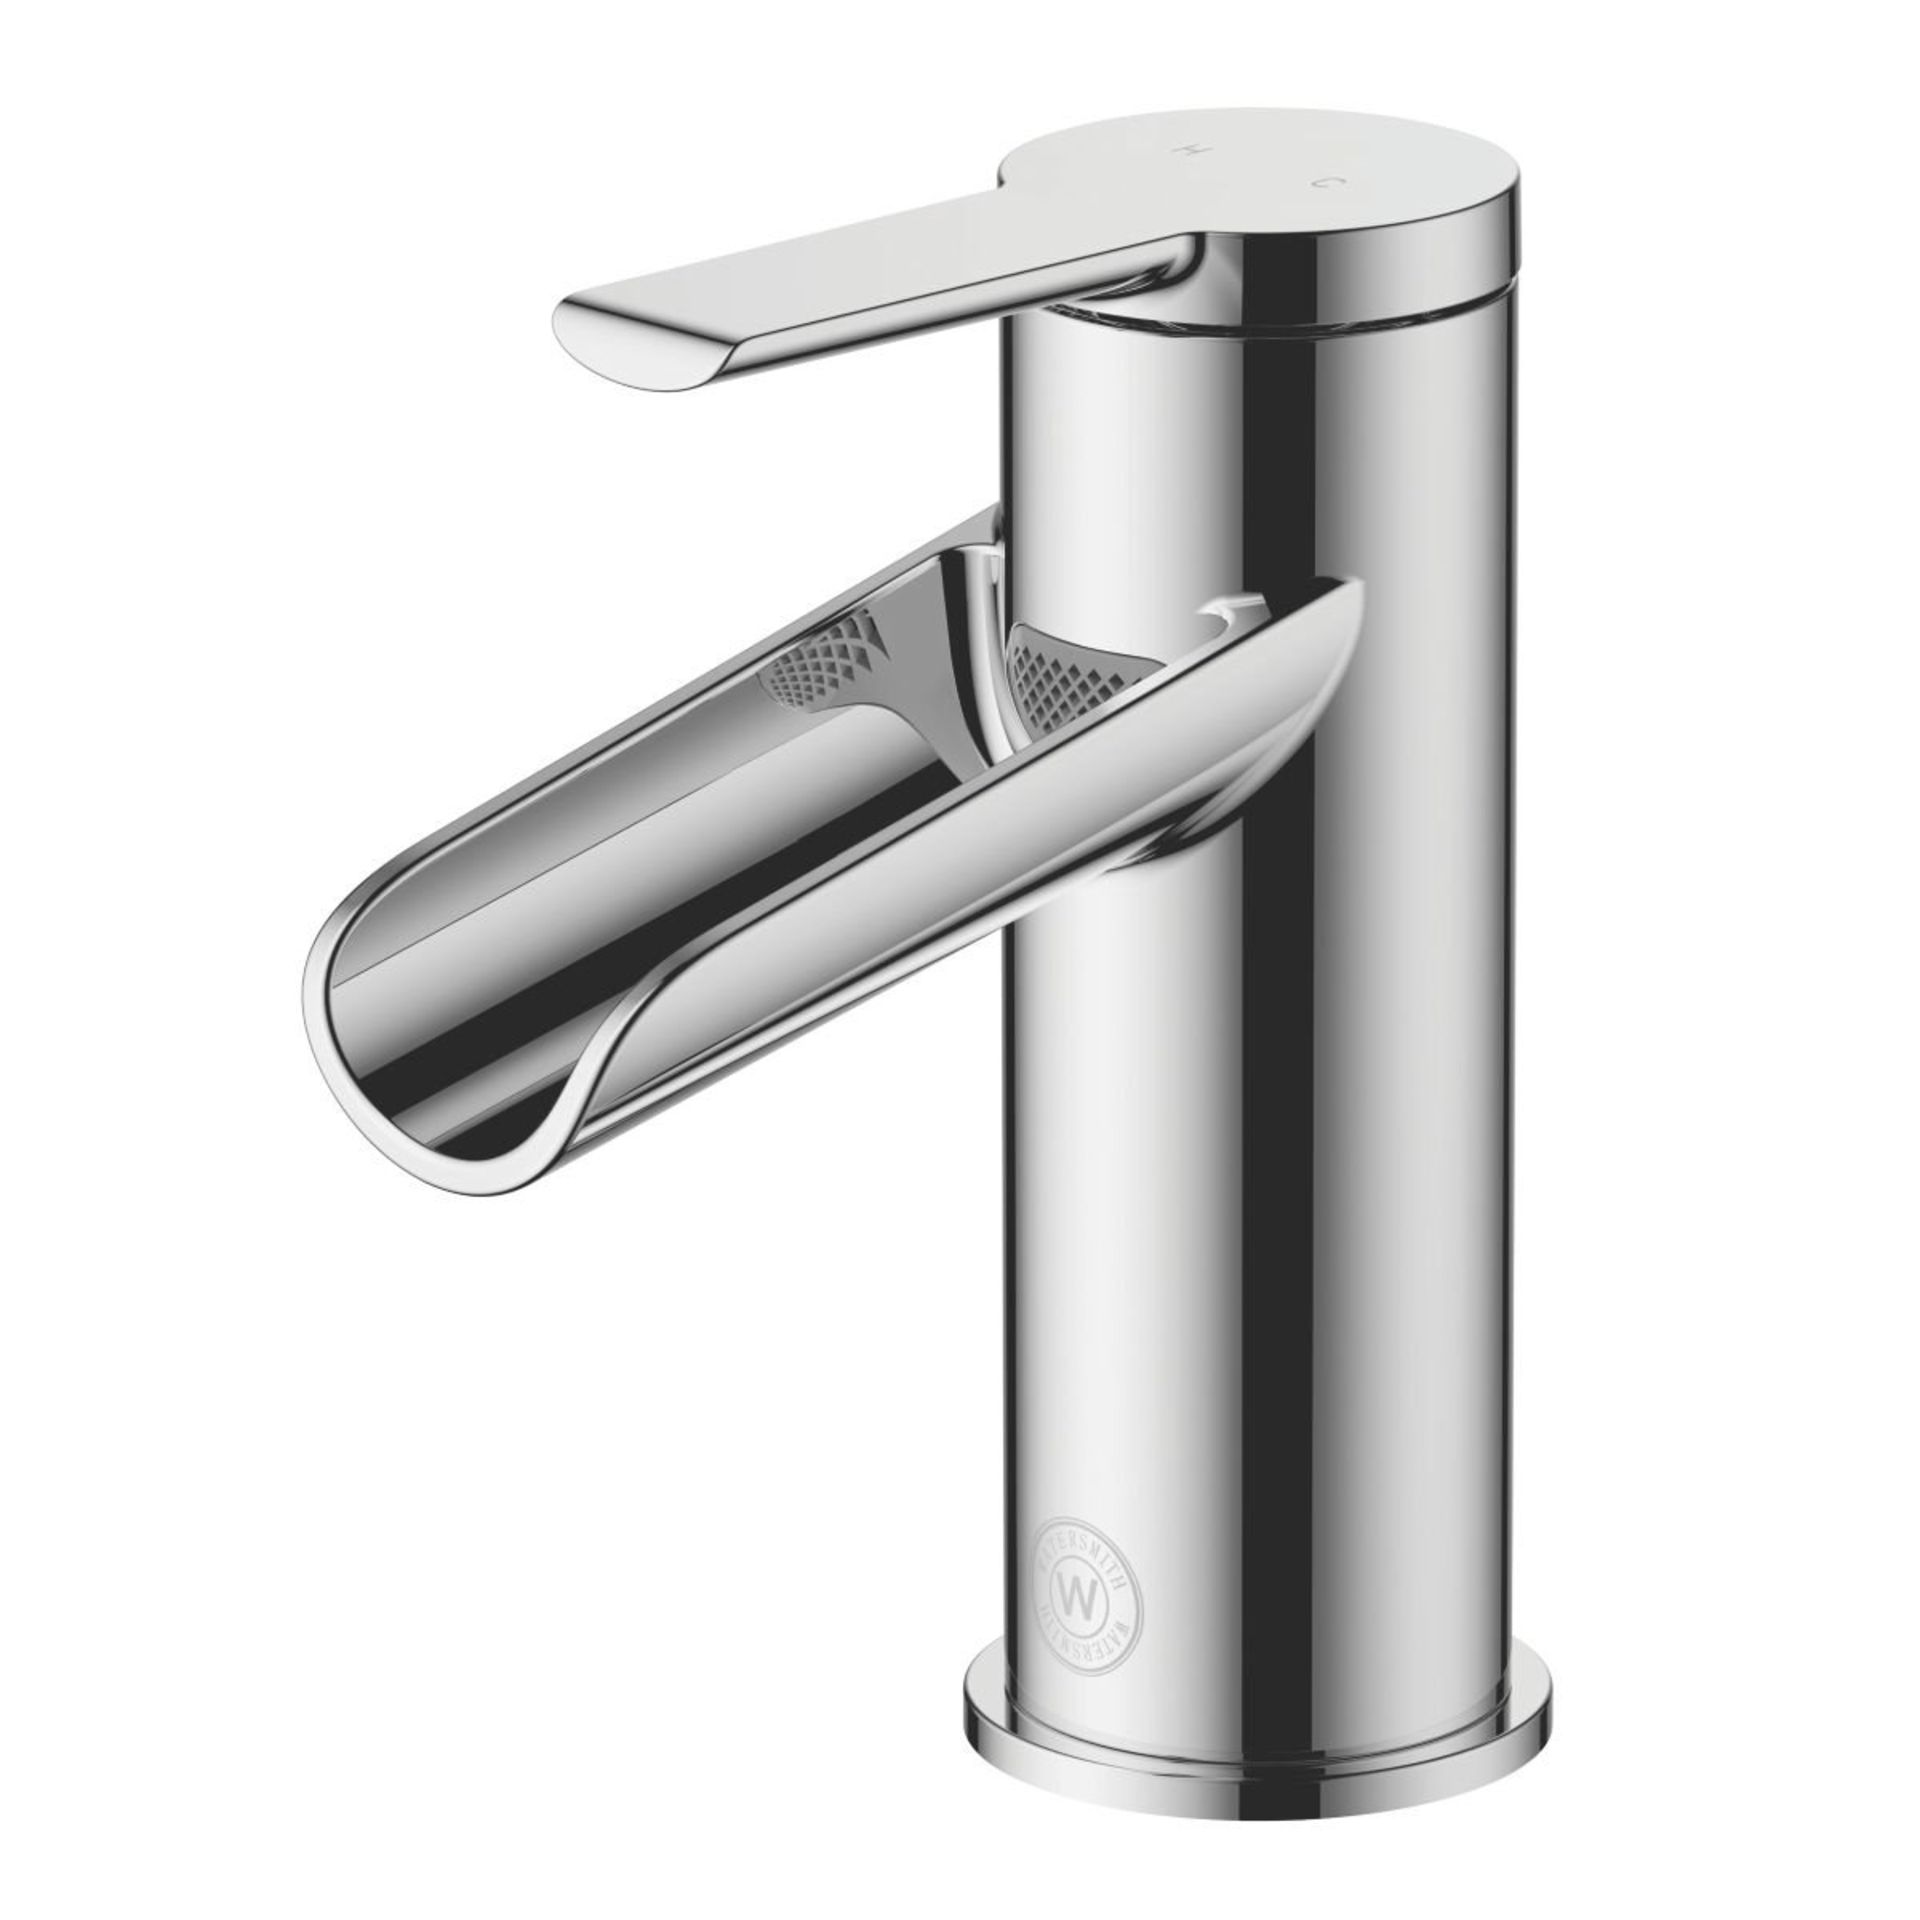 (XX73) Heritage Abbey Waterfall Basin Mono Mixer Tap with Clicker Waste. Single Lever Operation...